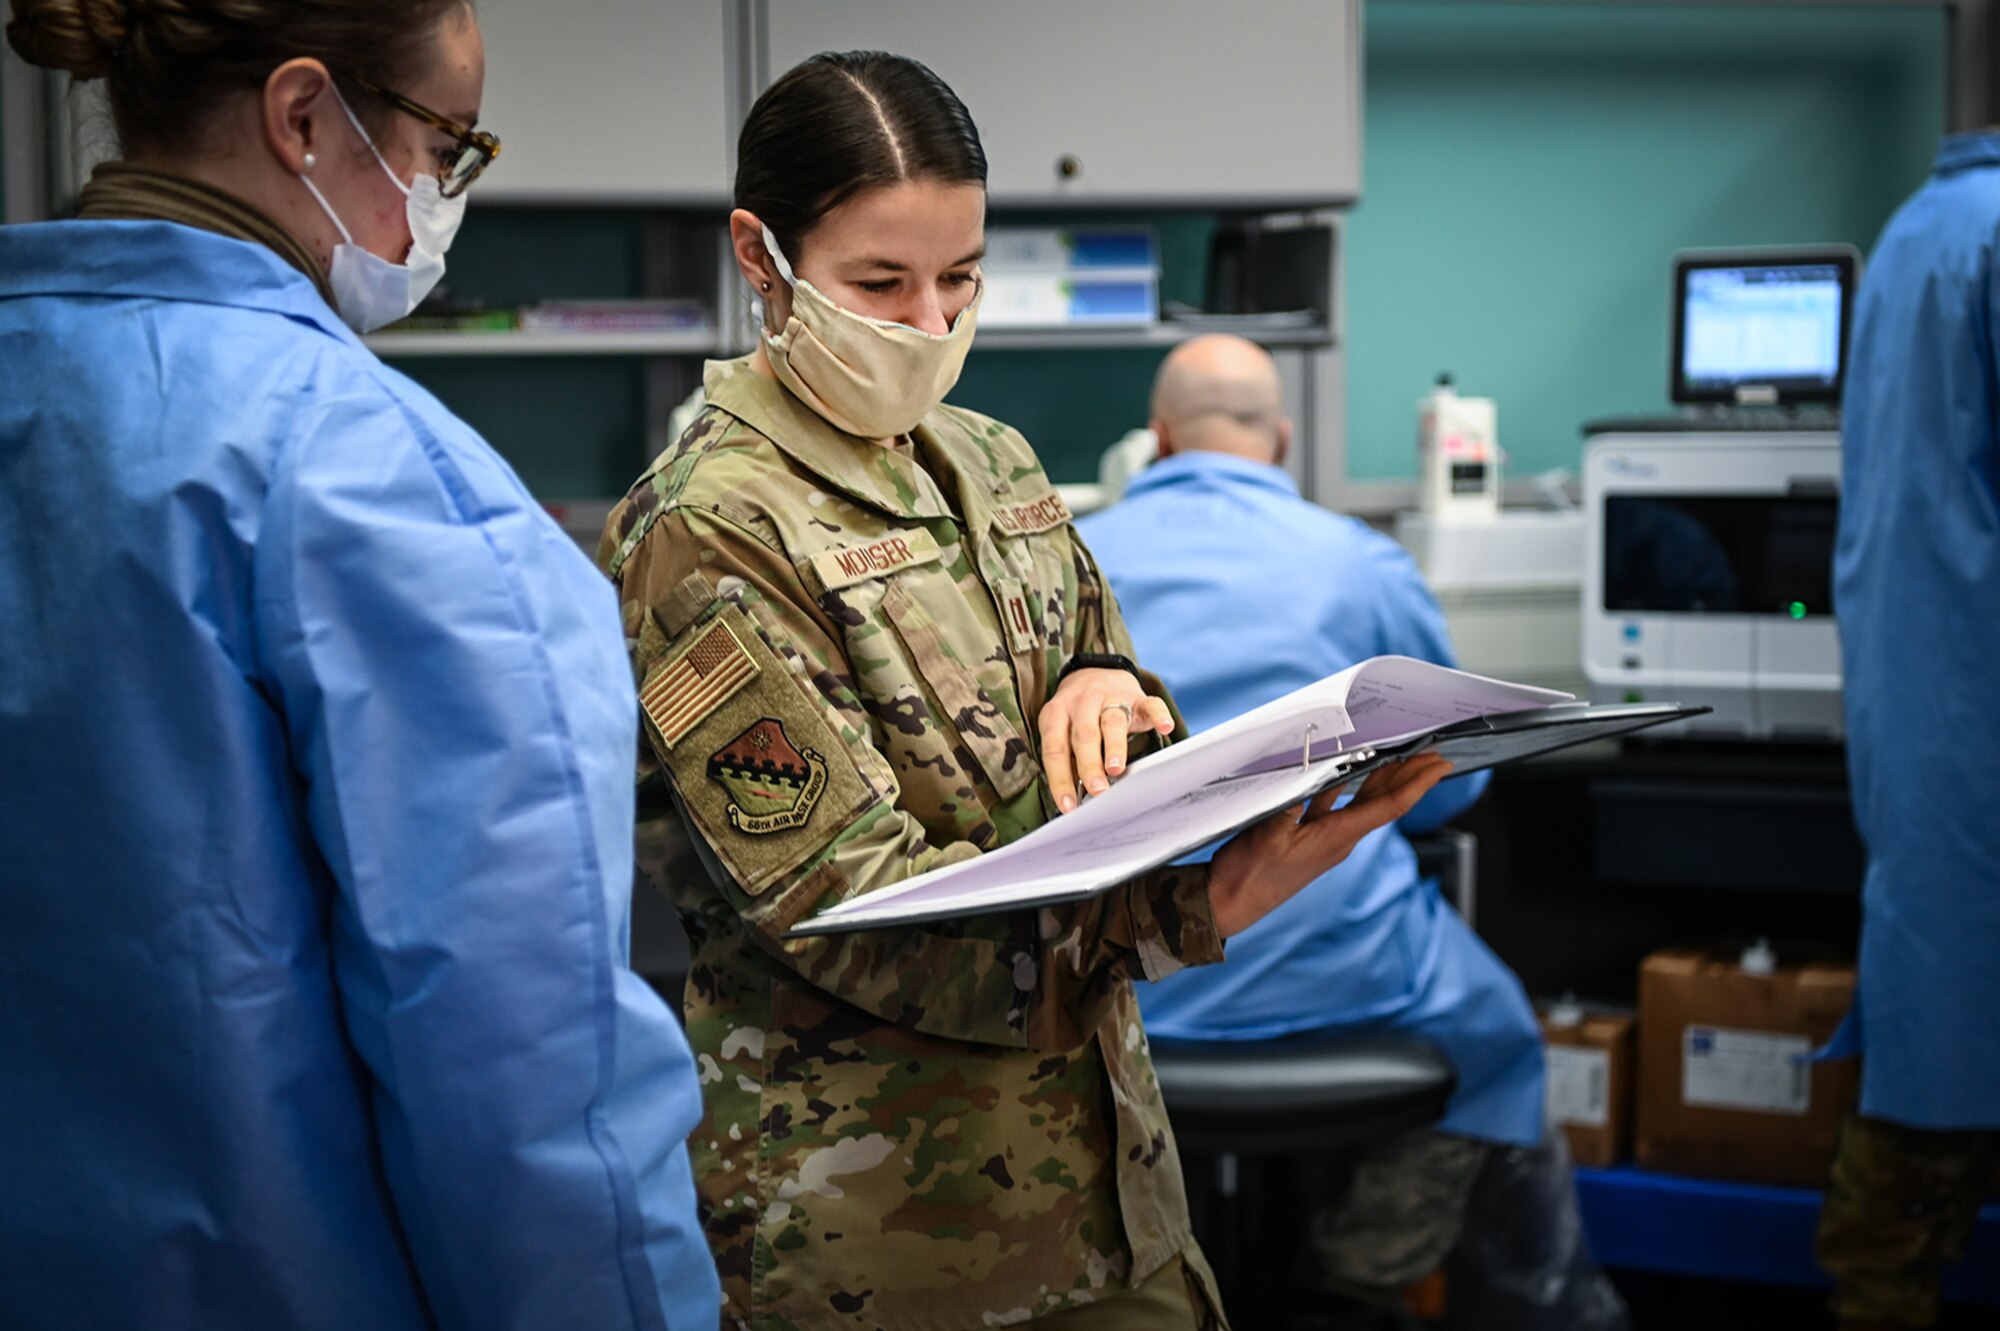 Capt. Jenifer Mouser, 66th Medical Squadron Laboratory officer in charge, center, discusses COVID-19 testing procedures with Airman 1st Class Kaylin Rice, laboratory technician, at the Hanscom Air Force Base, Mass., clinic, Dec. 3. The five-Airman team is responsible for collecting and testing all routine lab work as well as COVID tests taken on the installation. (U.S. Air Force photo by Todd Maki)